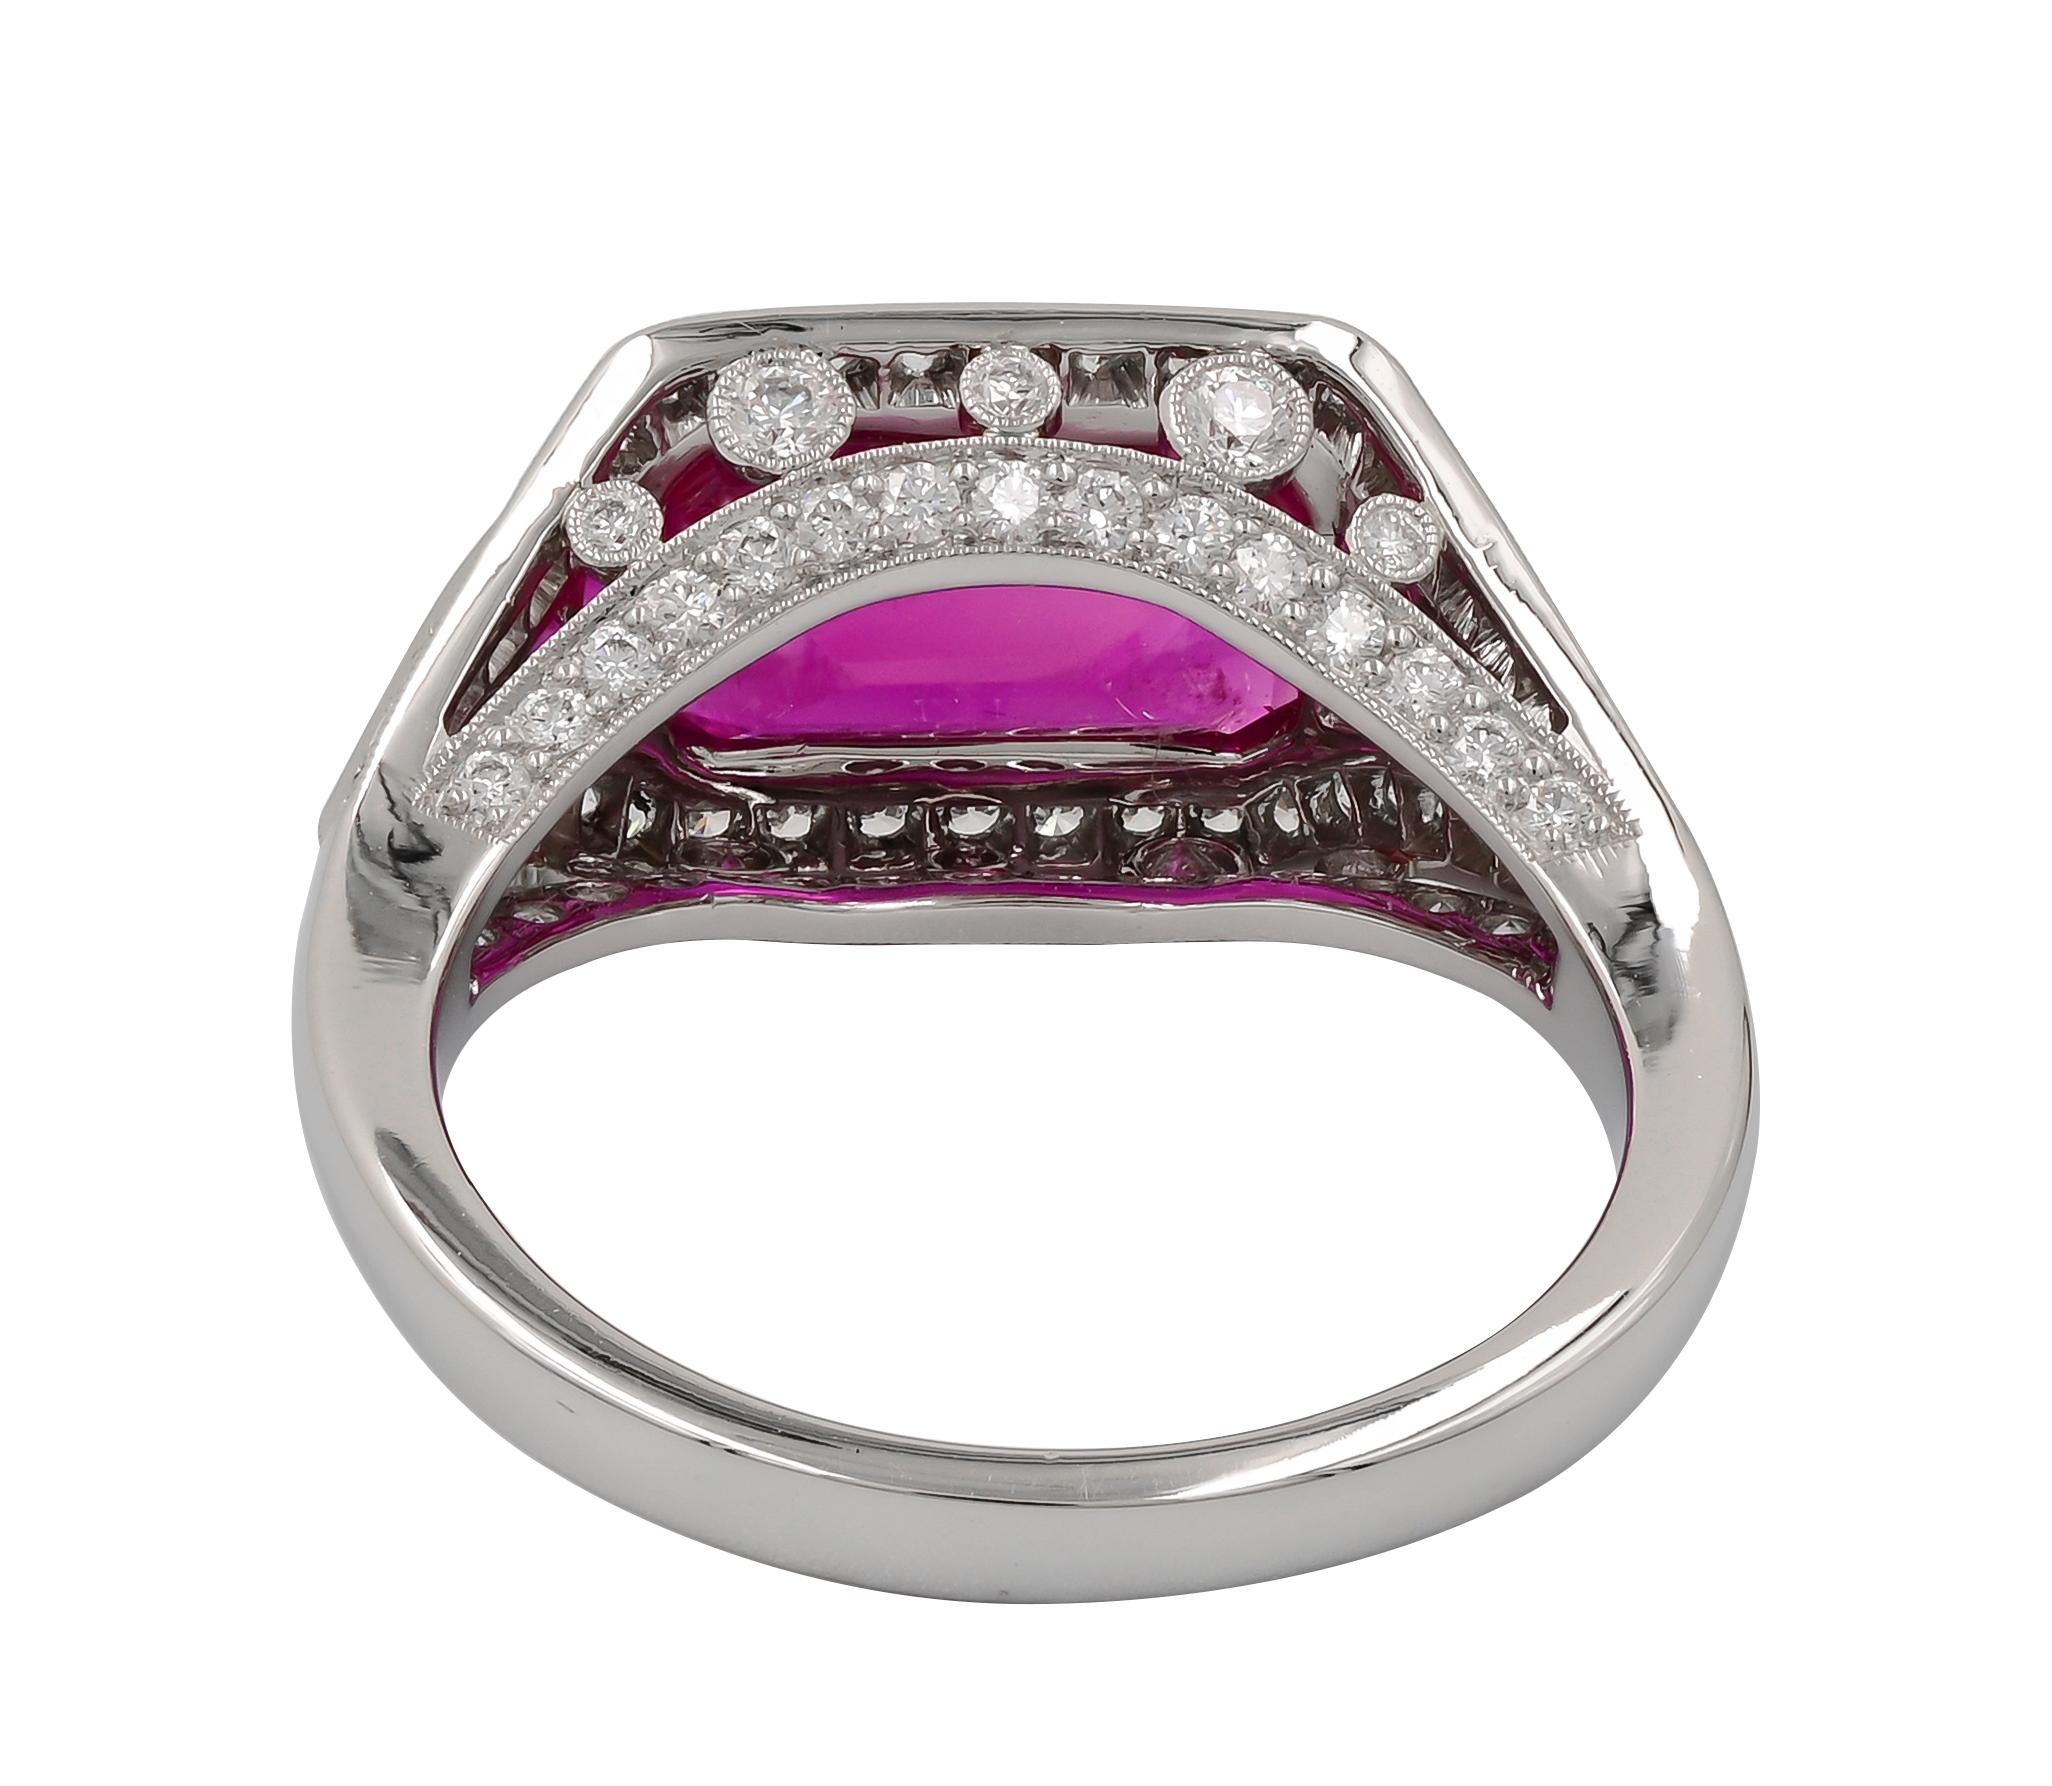 Sophia D. 3.52 Carat Ruby and Diamond Art Deco Platinum Ring In New Condition For Sale In New York, NY